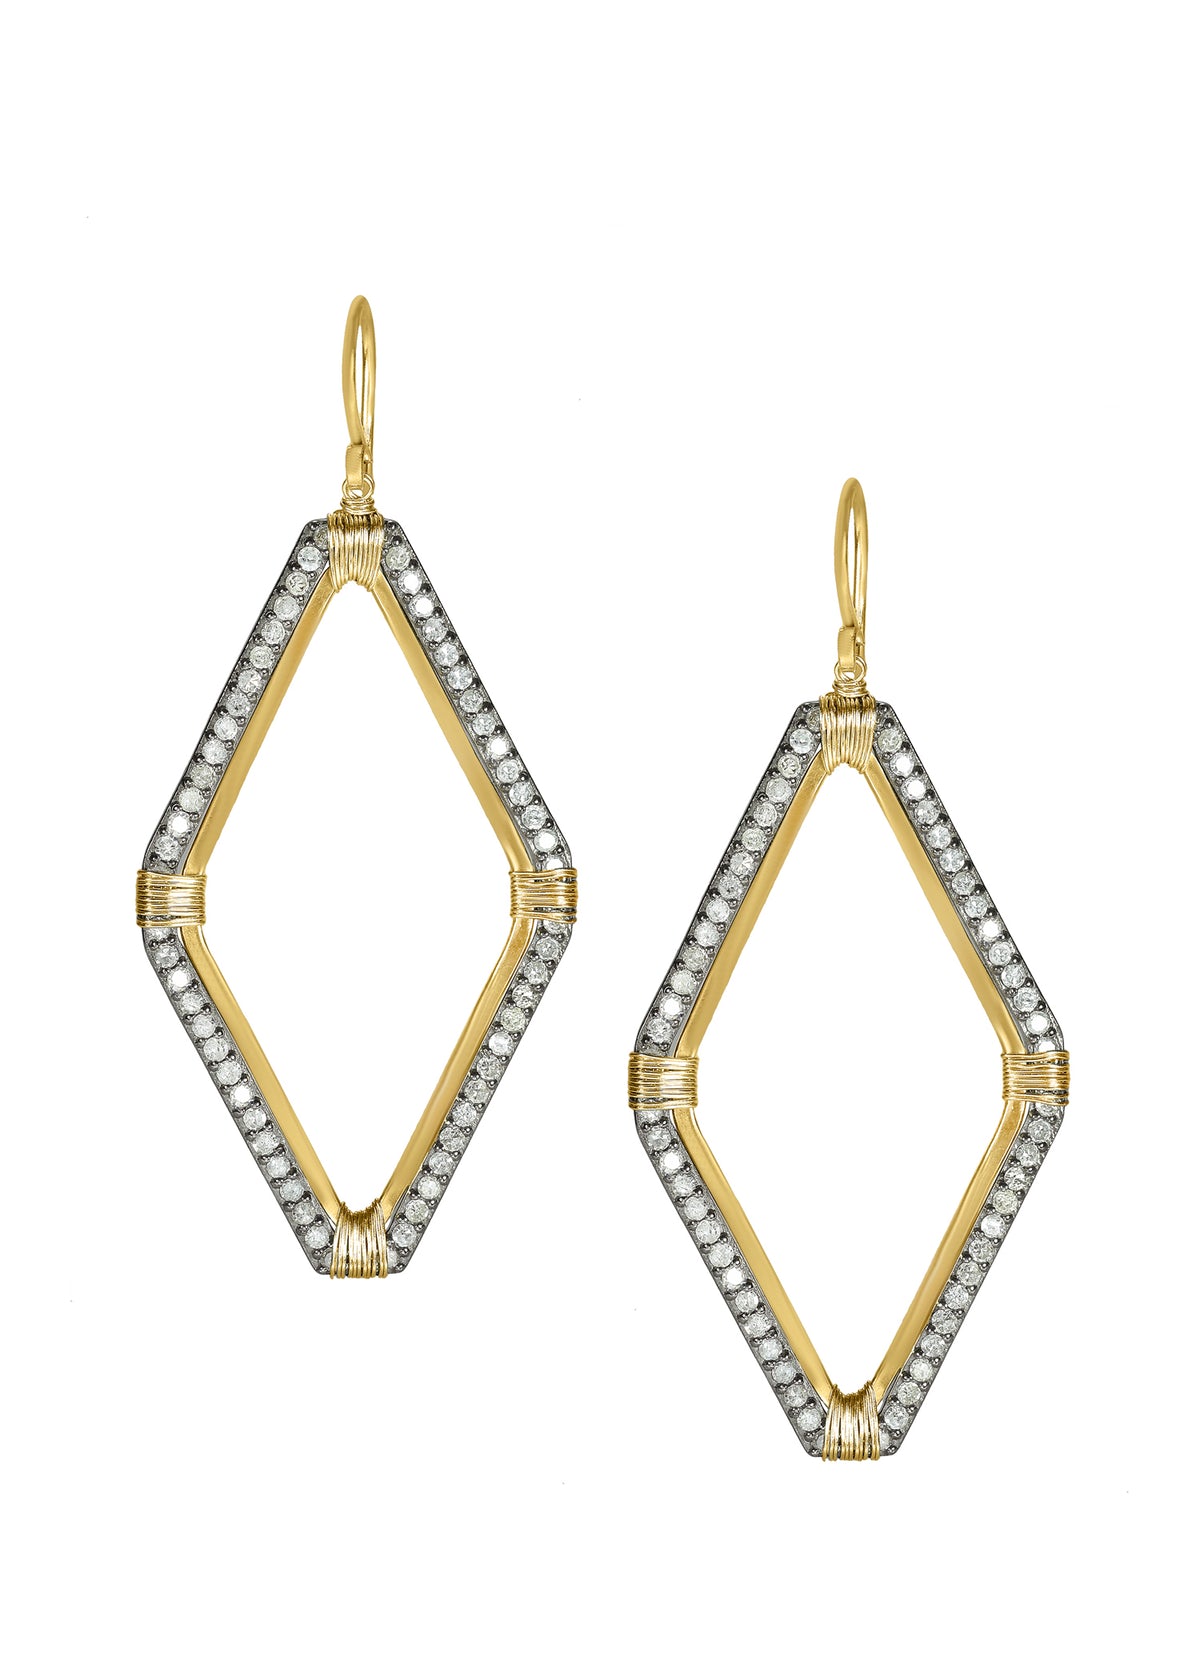 Diamond 14k gold Sterling silver Mixed metal Special order only Earrings measure 2-1/8&quot; in length (including the ear wires) and 1&quot; in width Handmade in our Los Angeles studio